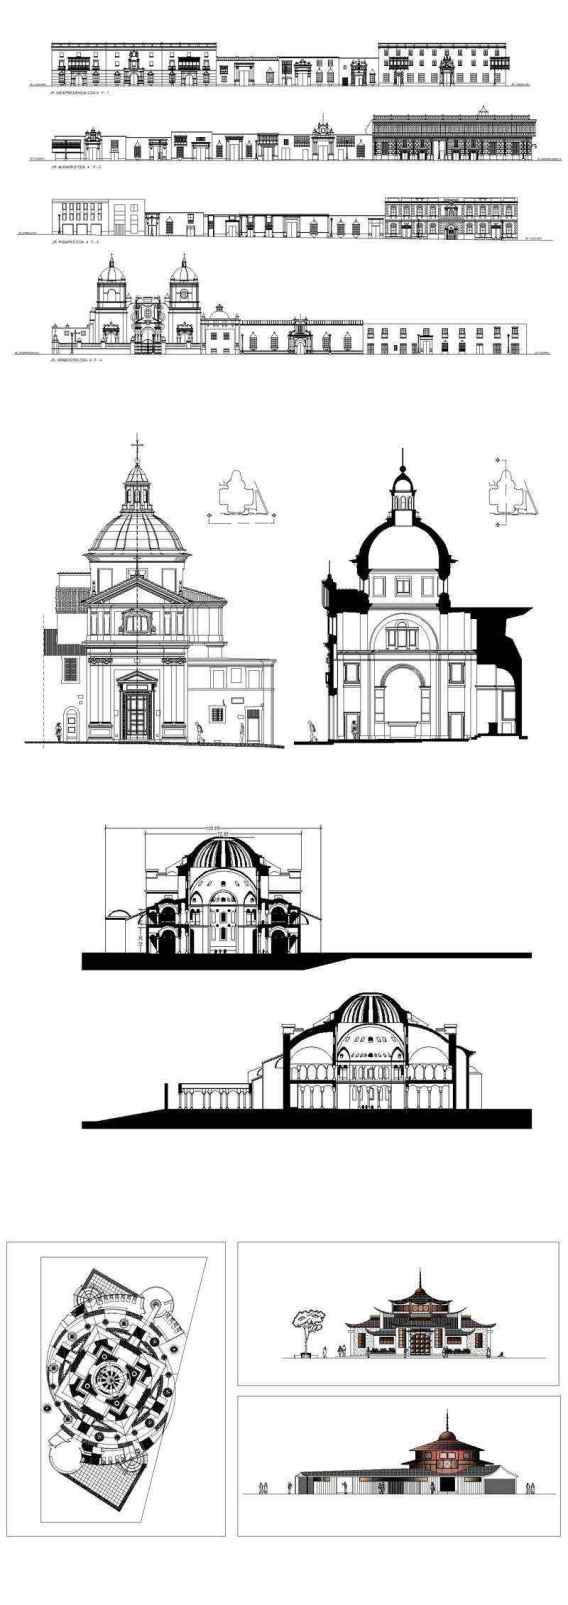 ★【Neoclassical Style Decor CAD Design Elements Collection】Neoclassical interior, Home decor,Traditional home decorating,Decoration@Autocad Blocks,Drawings,CAD Details,Elevation